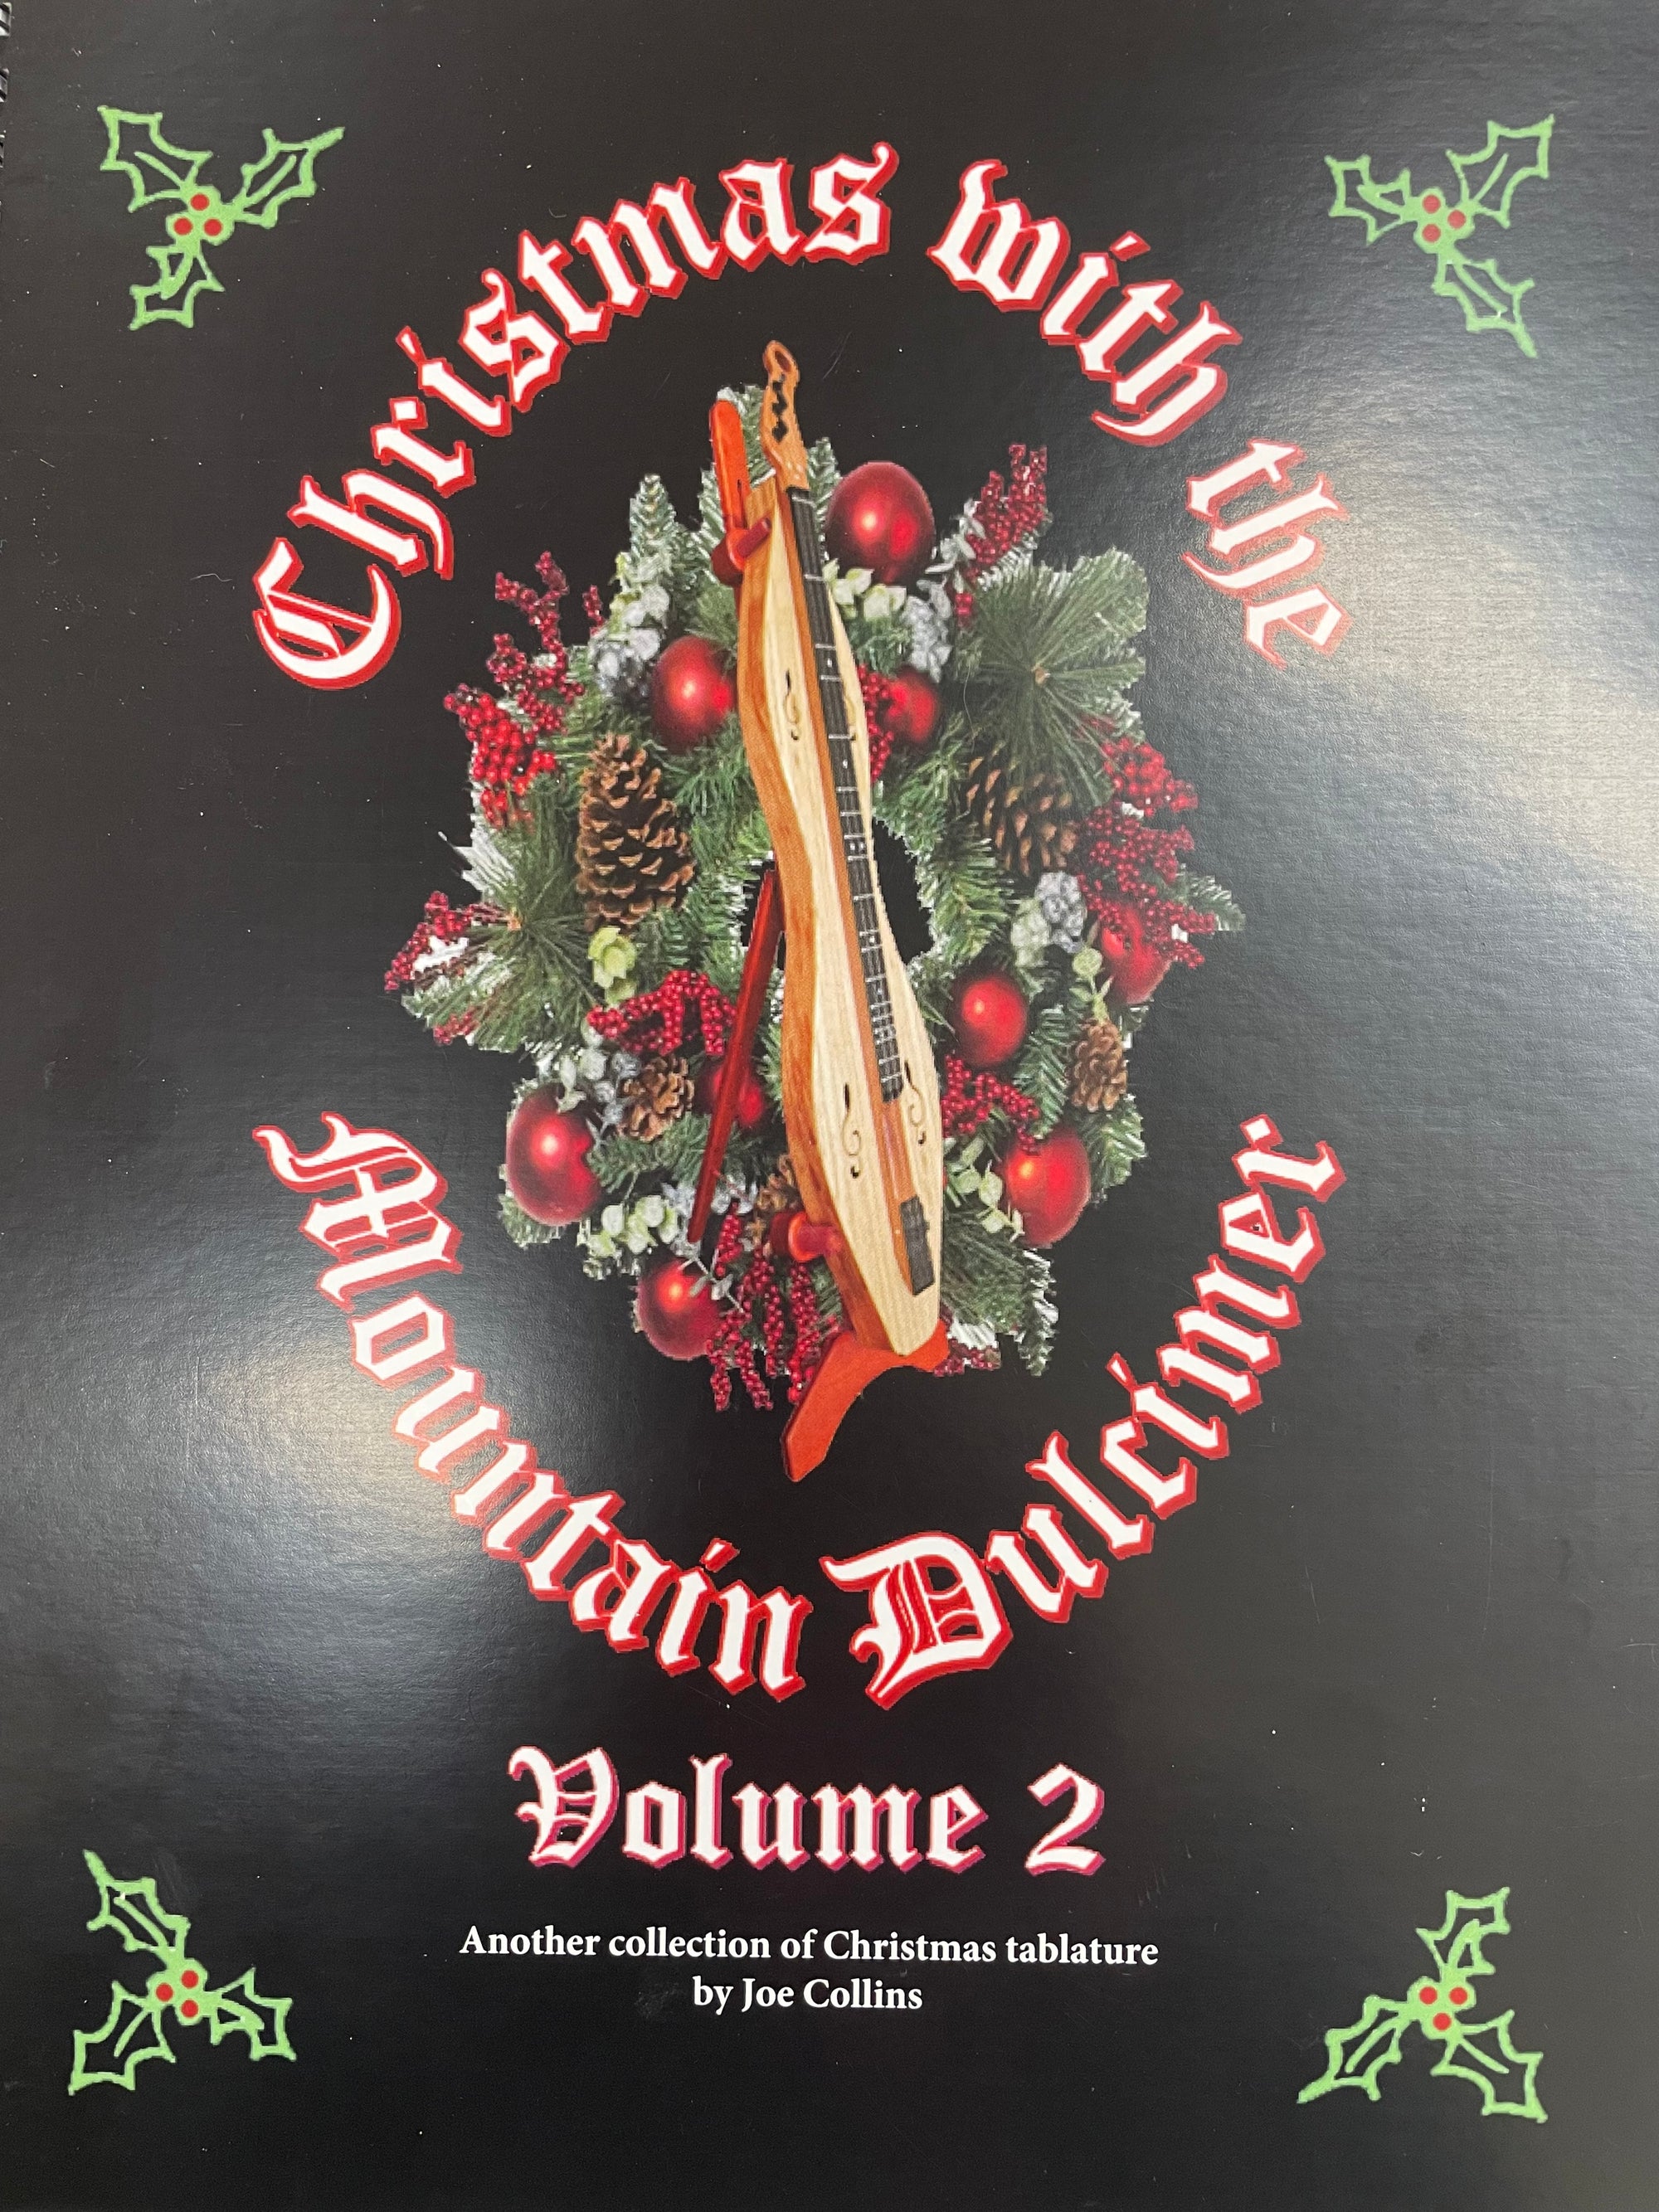 Christmas Favorites on the Mountain Dulcimer, Volume 2: D-A-D Tuning by Joe Collins.
Product Name: Christmas with the Mountain Dulcimer Vol 2 - by Joe Collins